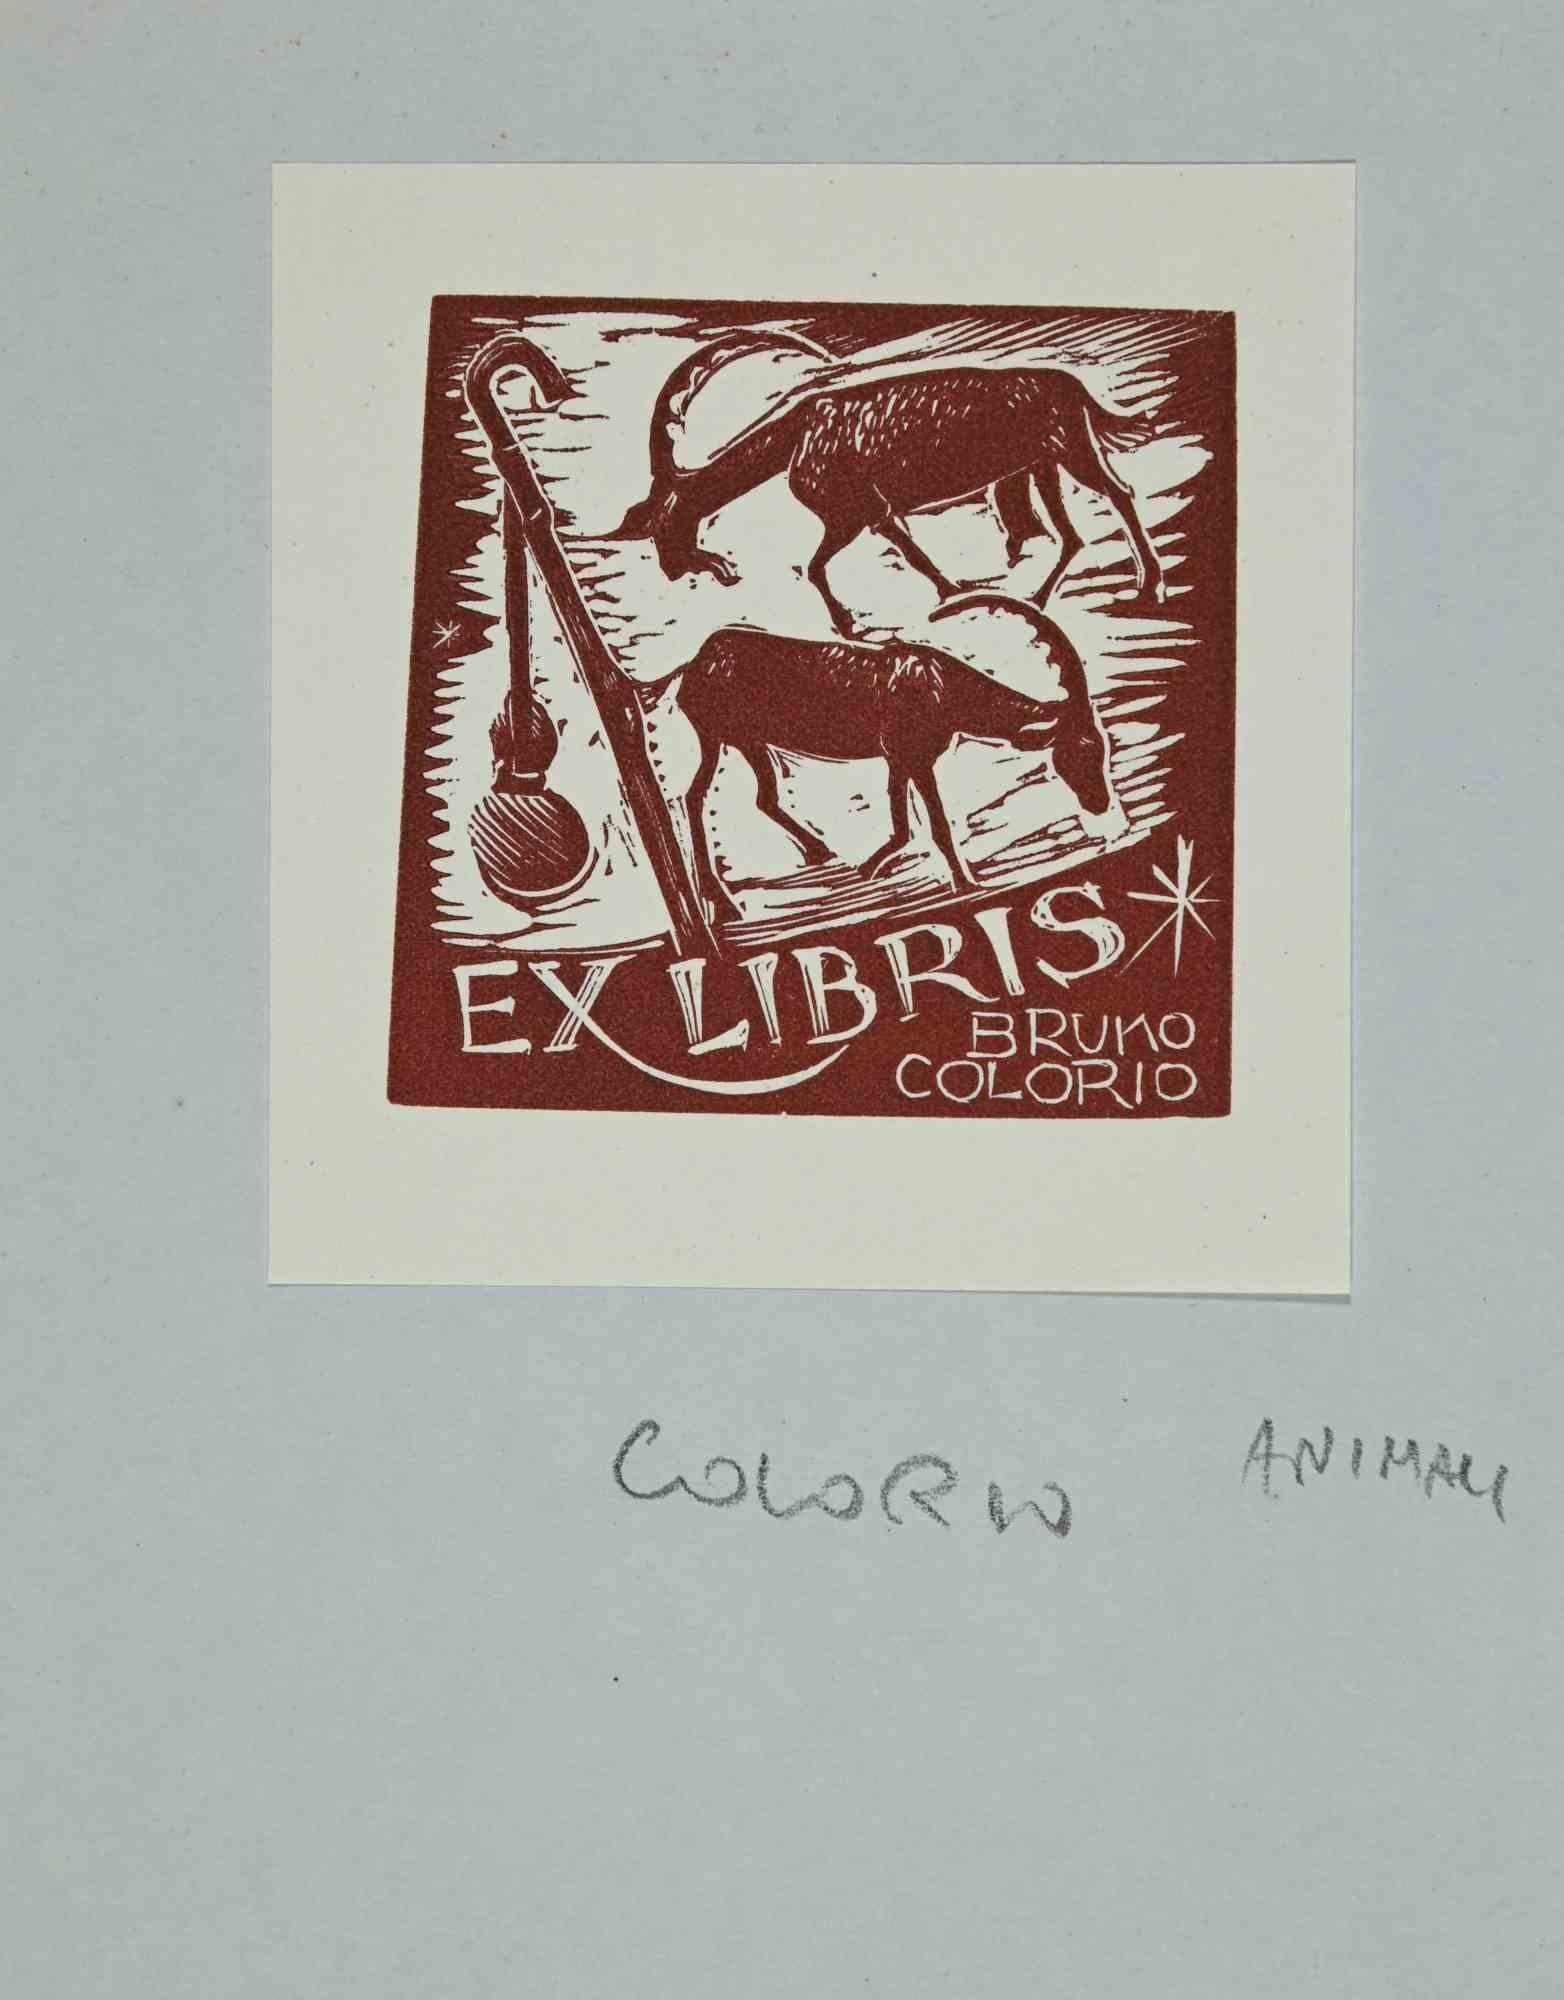 Ex libris - Bruno Colorio is an Artwork realized in 1946,  by the Artist Bruno Colorio , from Italy. 

Woodcut print on ivory paper.  Signed on plate and dated on back. The work is glued on colored cardboard.

Total dimensions: 20x15 cm.

Good